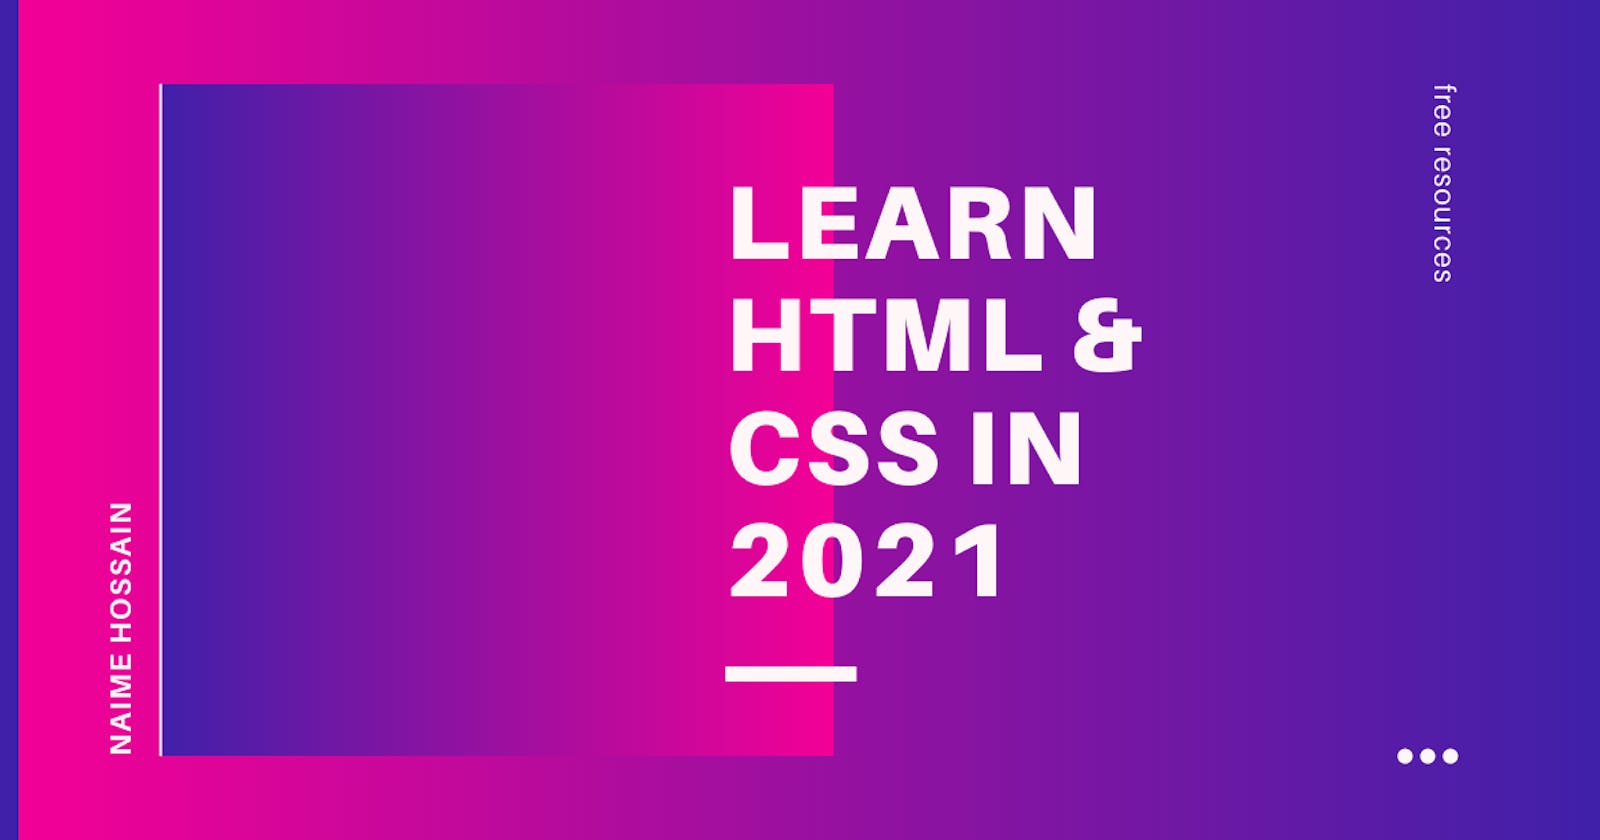 The Ultimate HTML&CSS Free Learning Resources For 2021